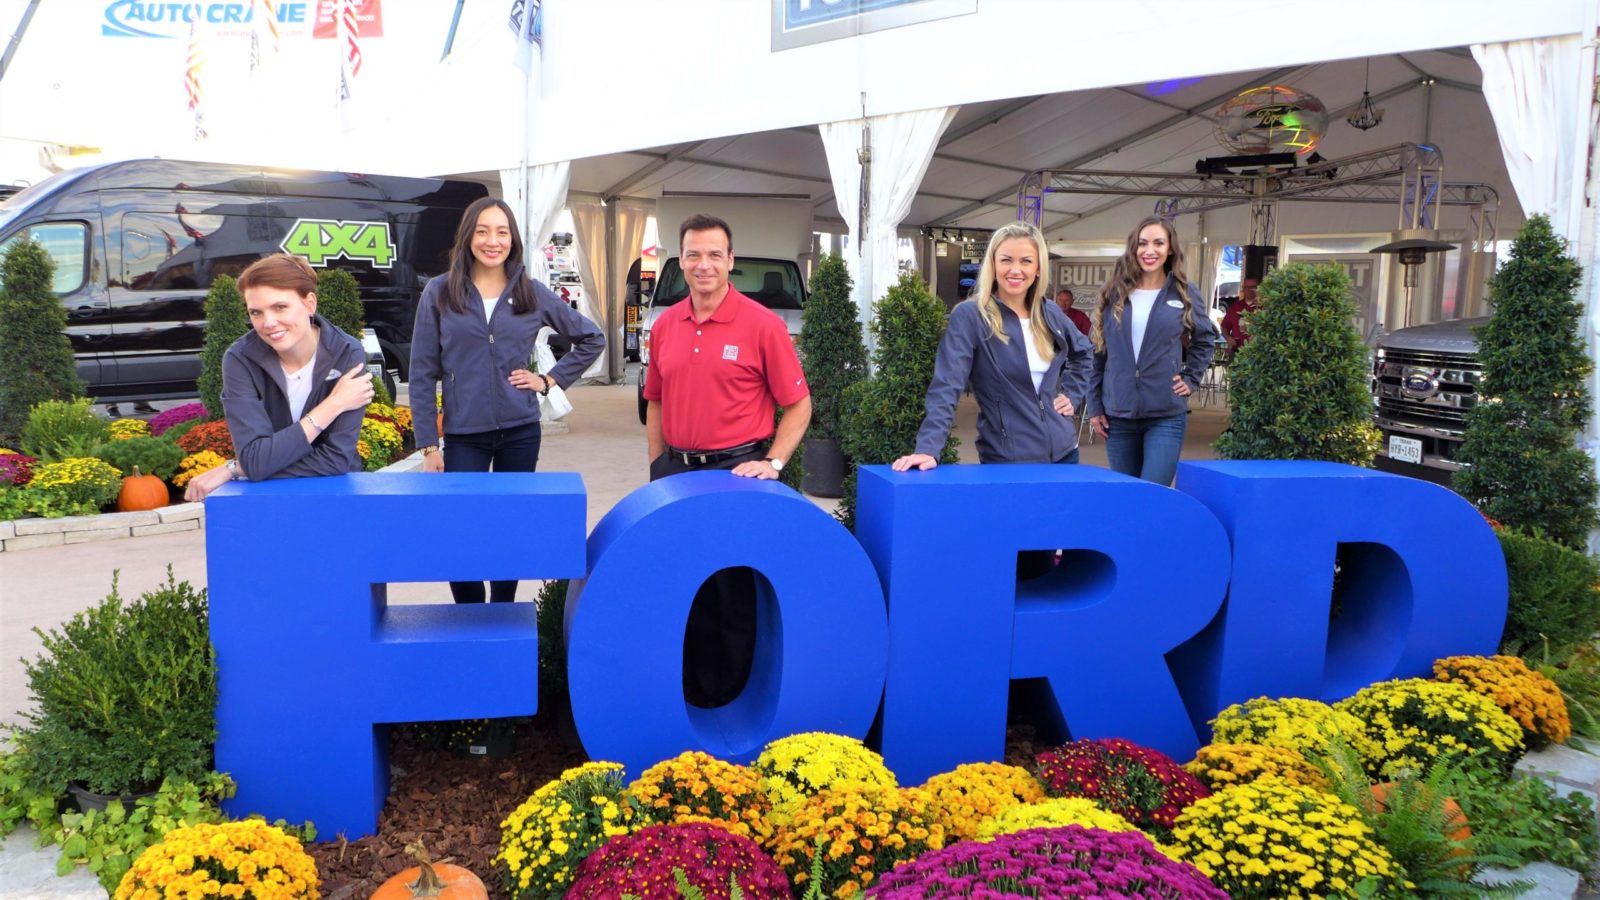 TPG Presenters and Brand Ambassadors assist Ford at ICUEE.